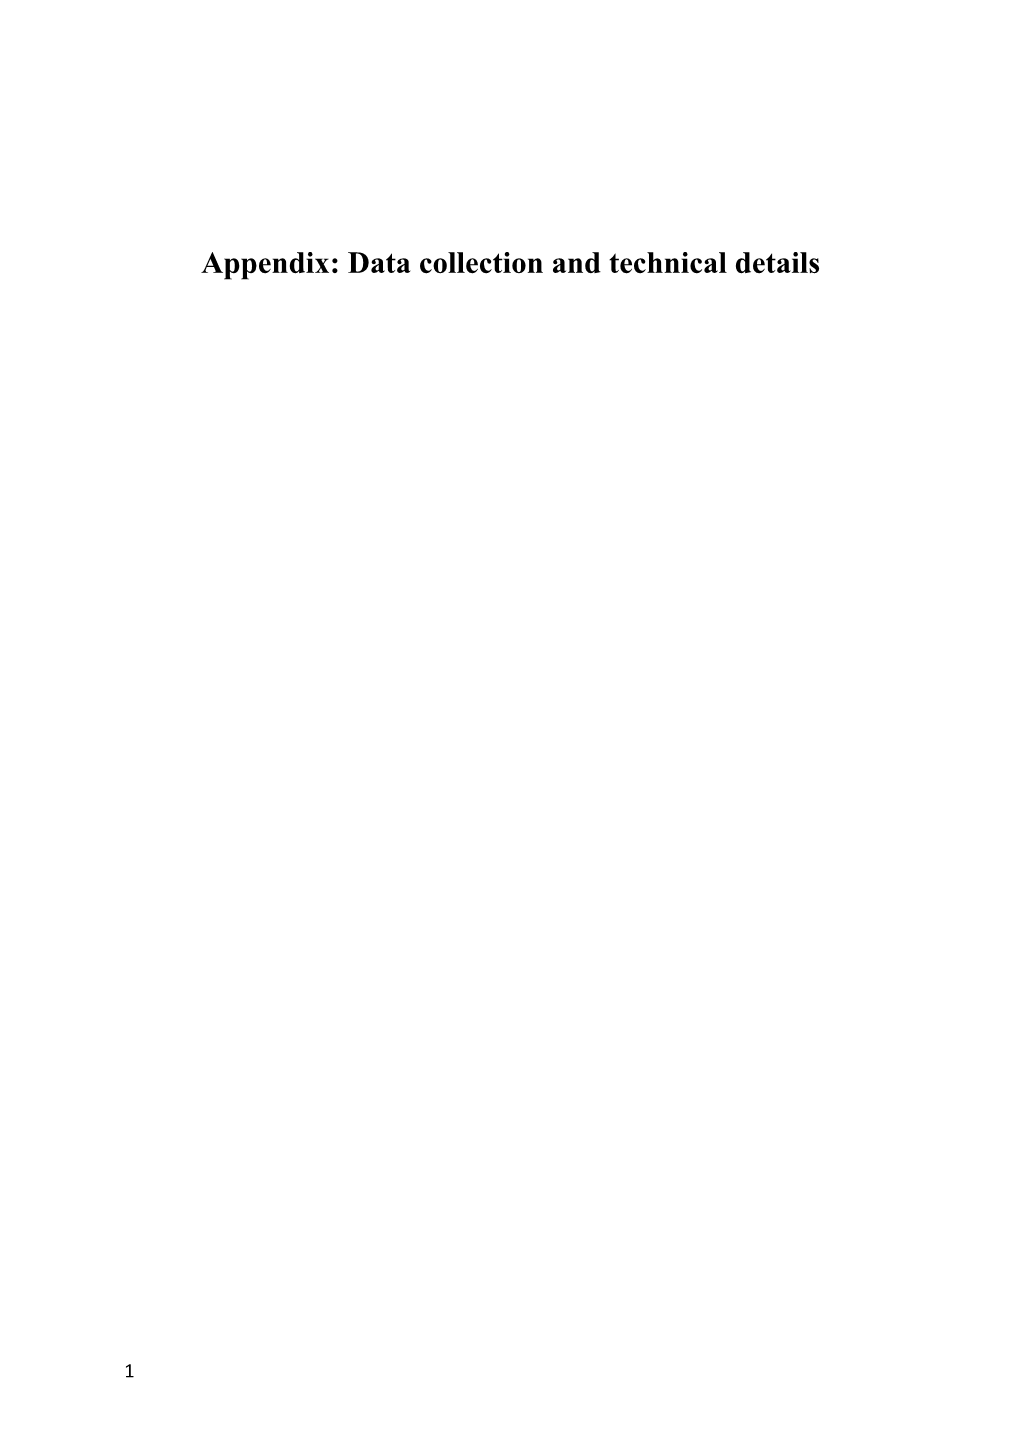 Appendix: Data Collection and Technical Details